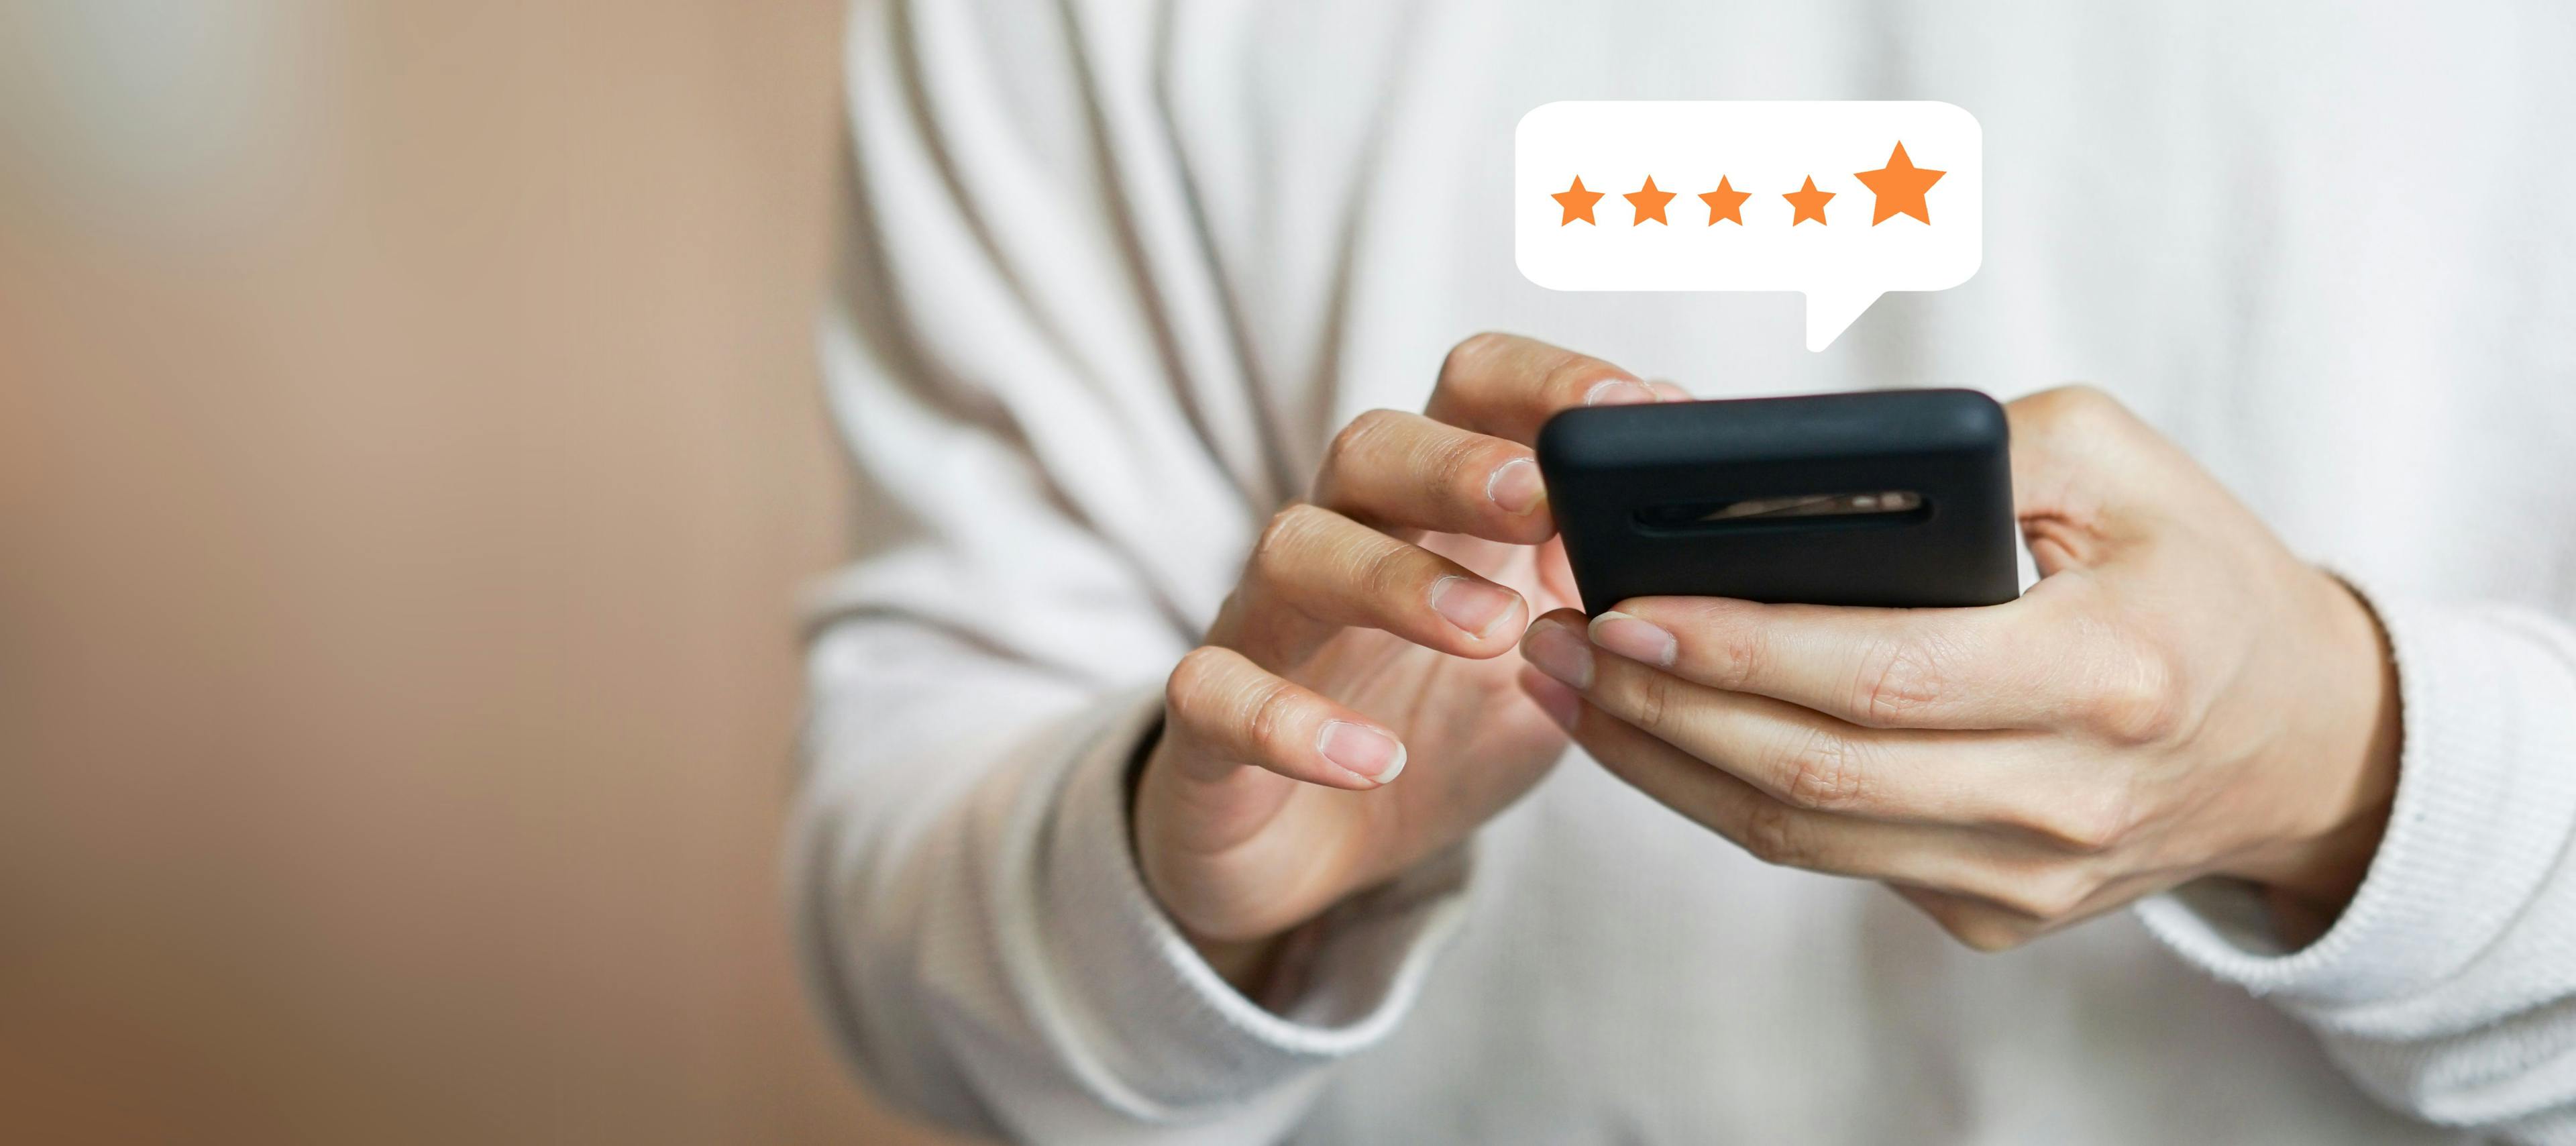 How to recover from a bad online review